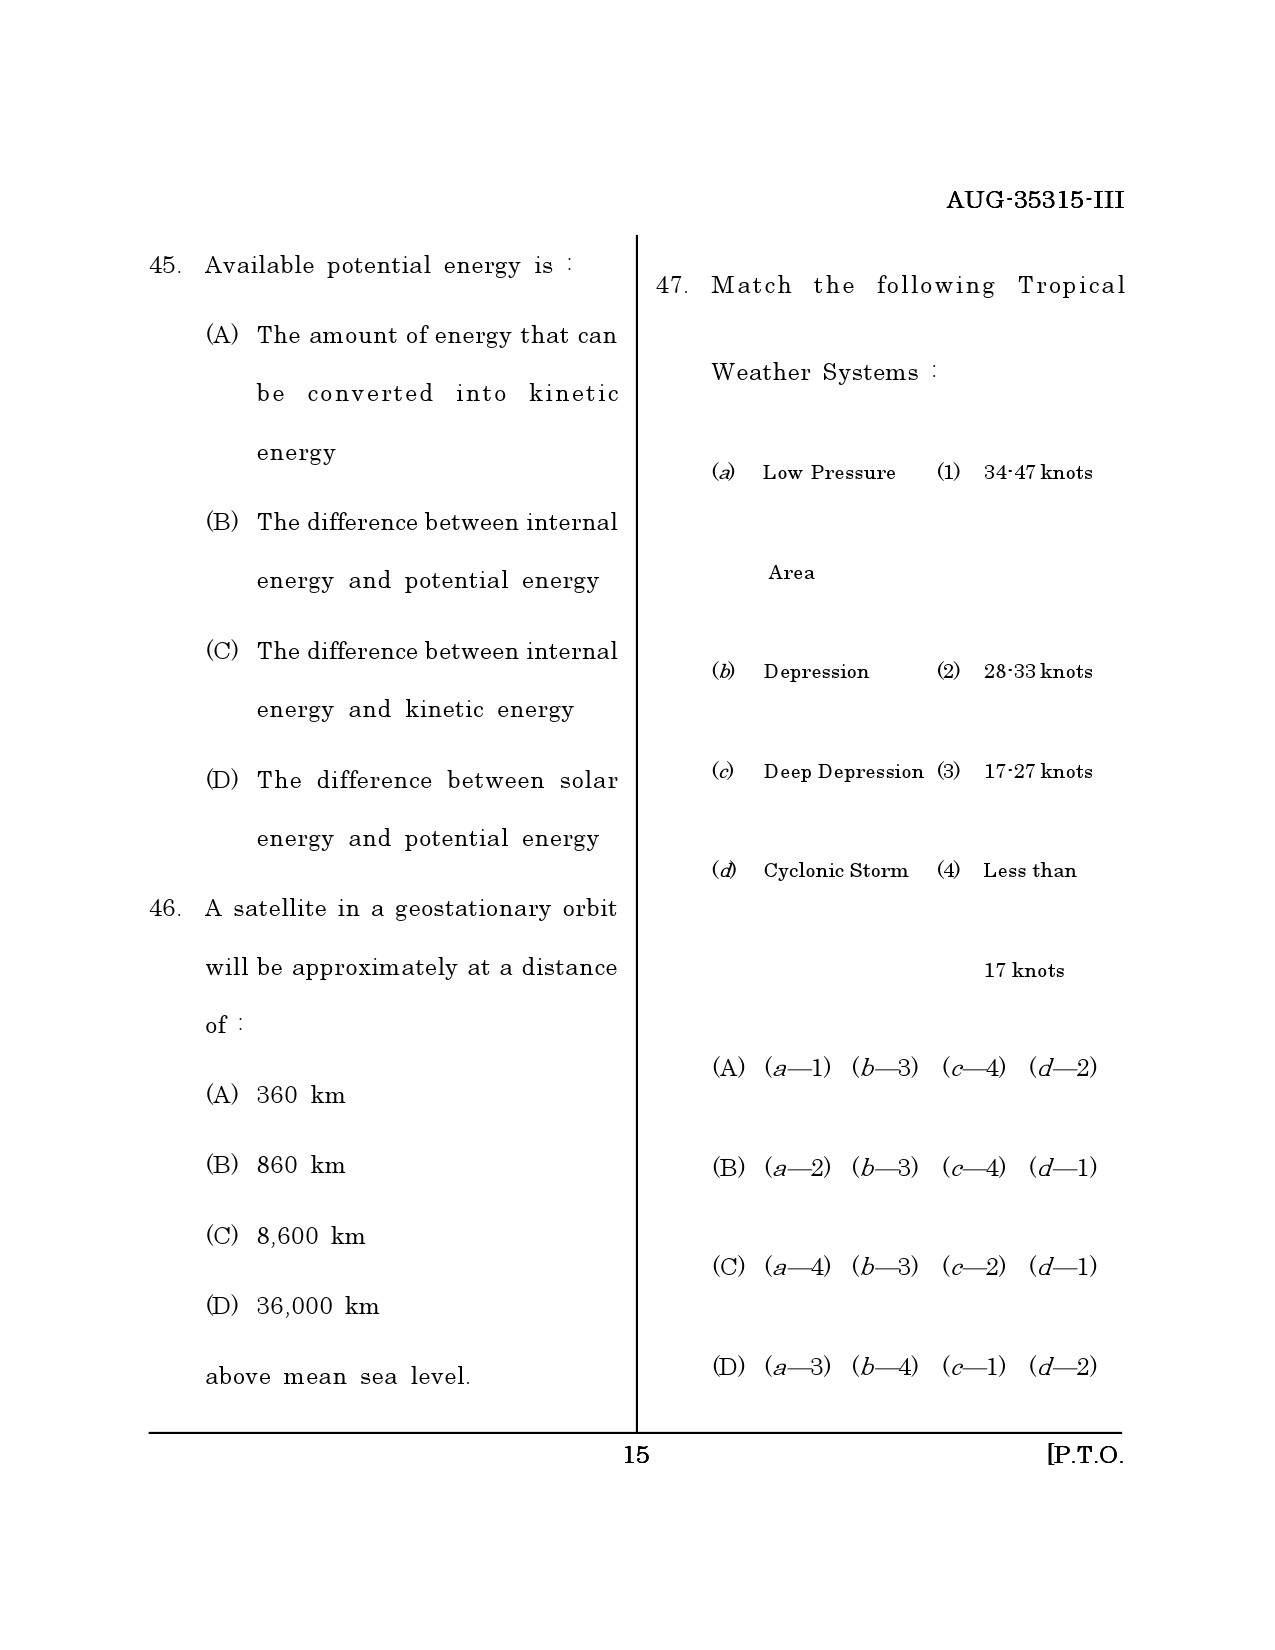 Maharashtra SET Earth Atmospheric Ocean Planetary Science Question Paper III August 2015 14